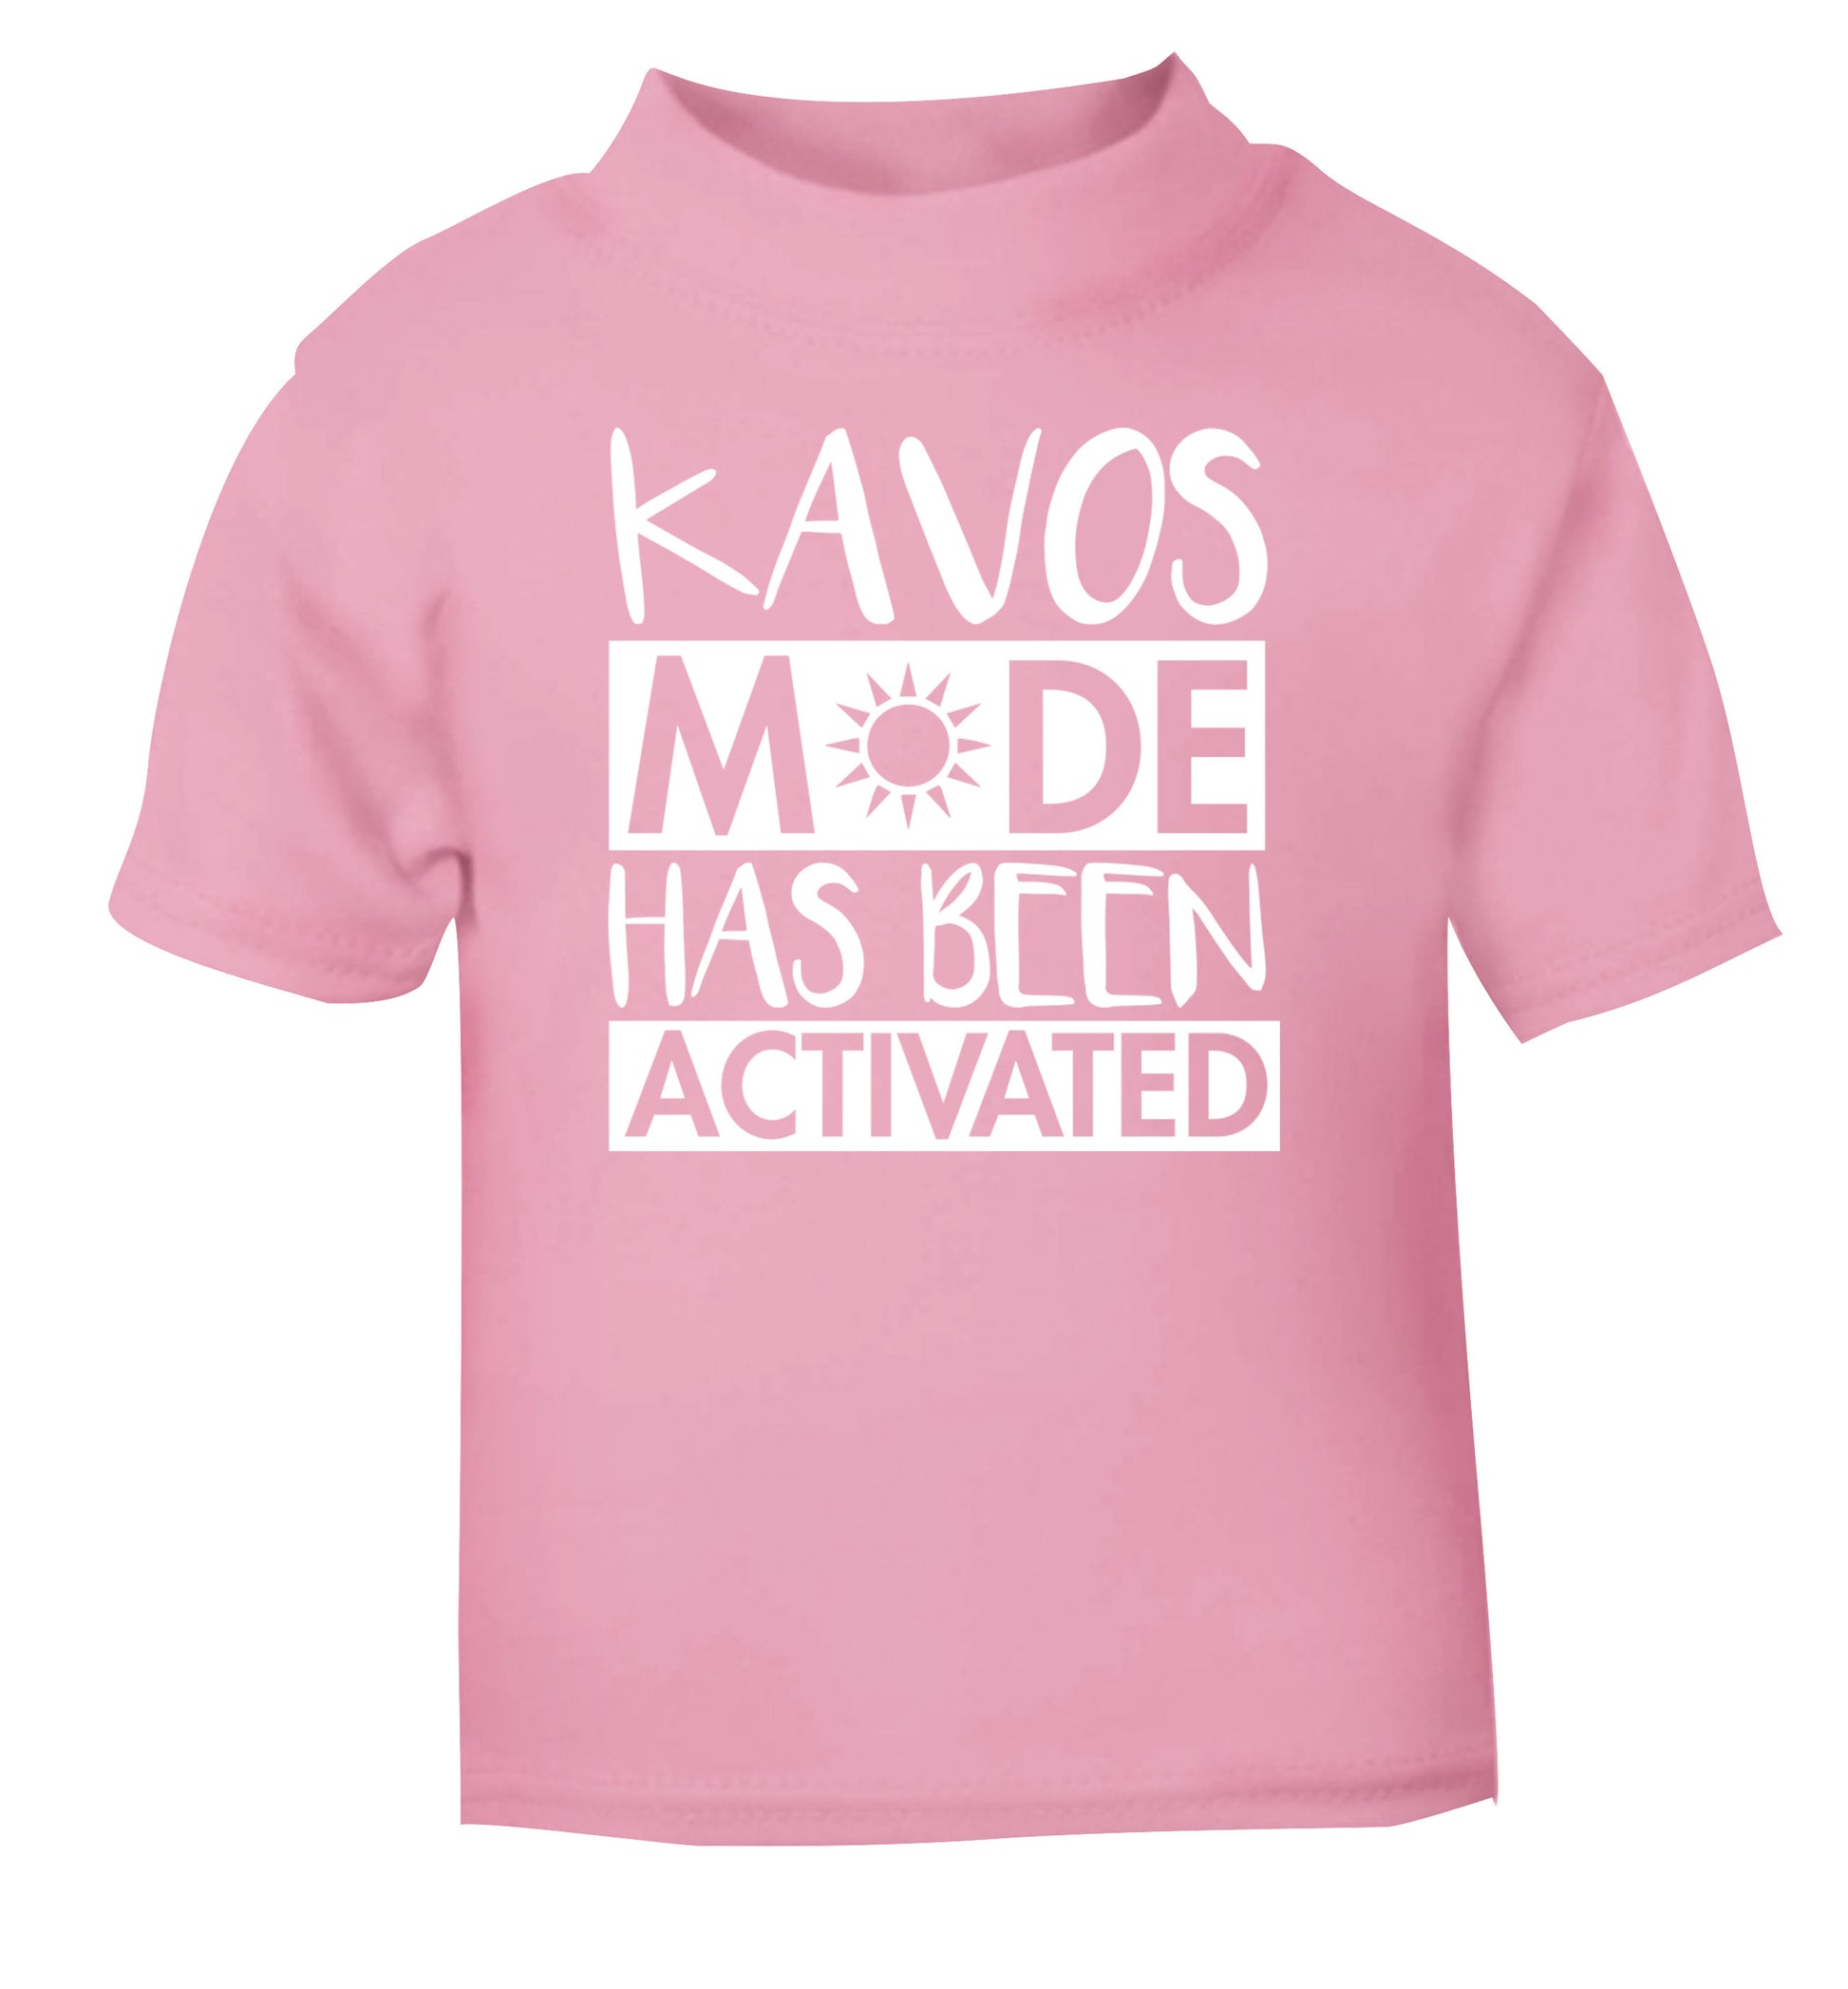 Kavos mode has been activated light pink Baby Toddler Tshirt 2 Years